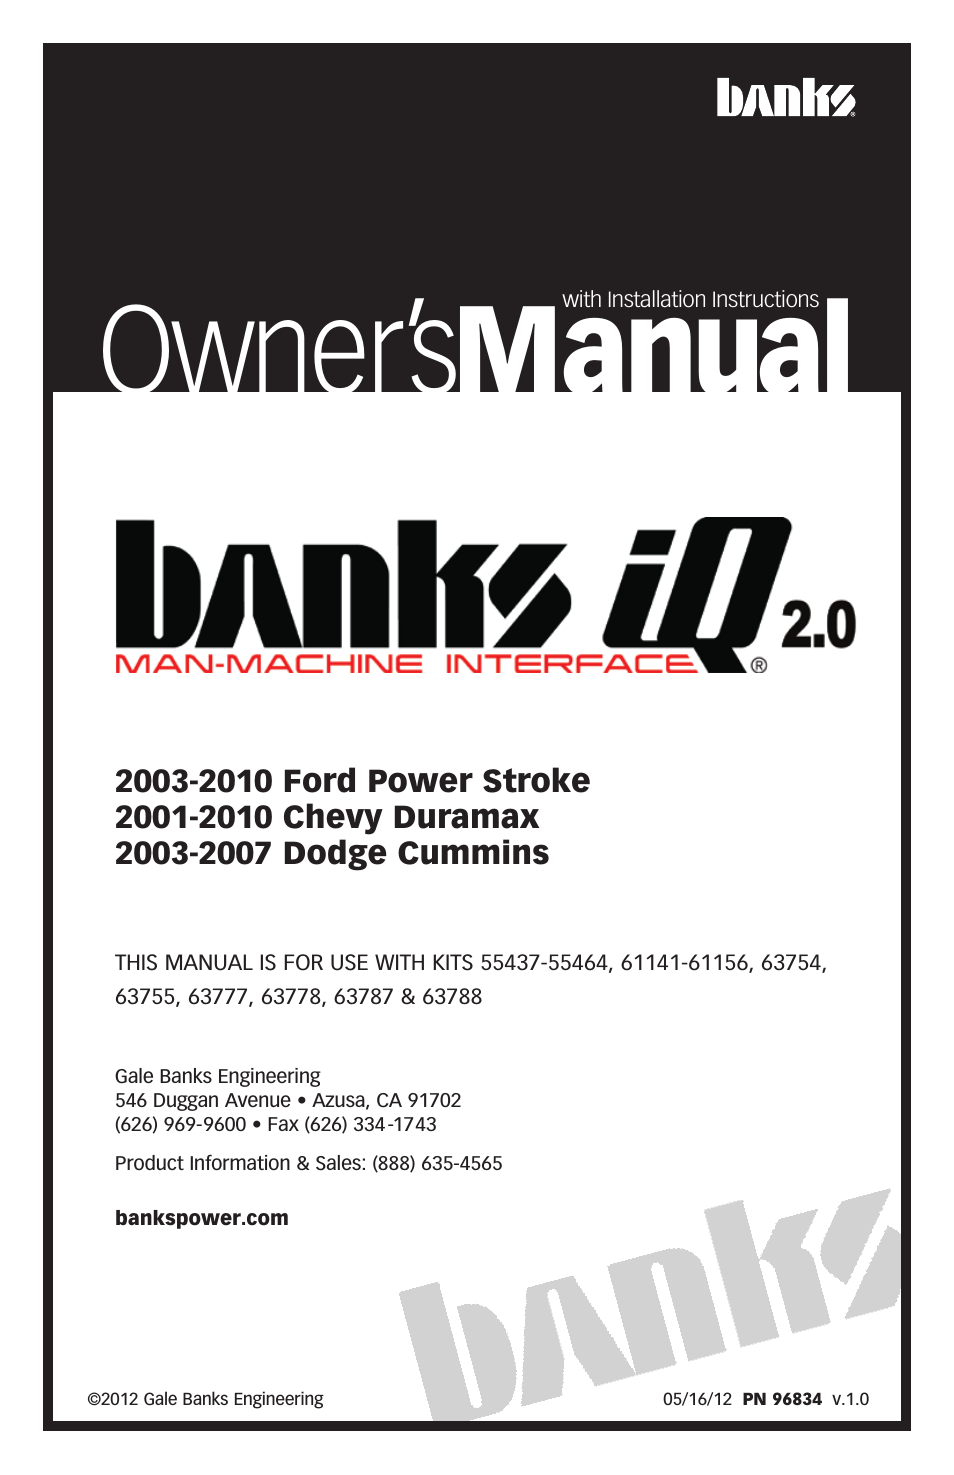 Ford Trucks: (Diesel ’03 - 07 6.0L Power Stroke) Interface- Banks iQ 2.0 Ford(03-10), Chevy(01-10), Dodge(03-07)